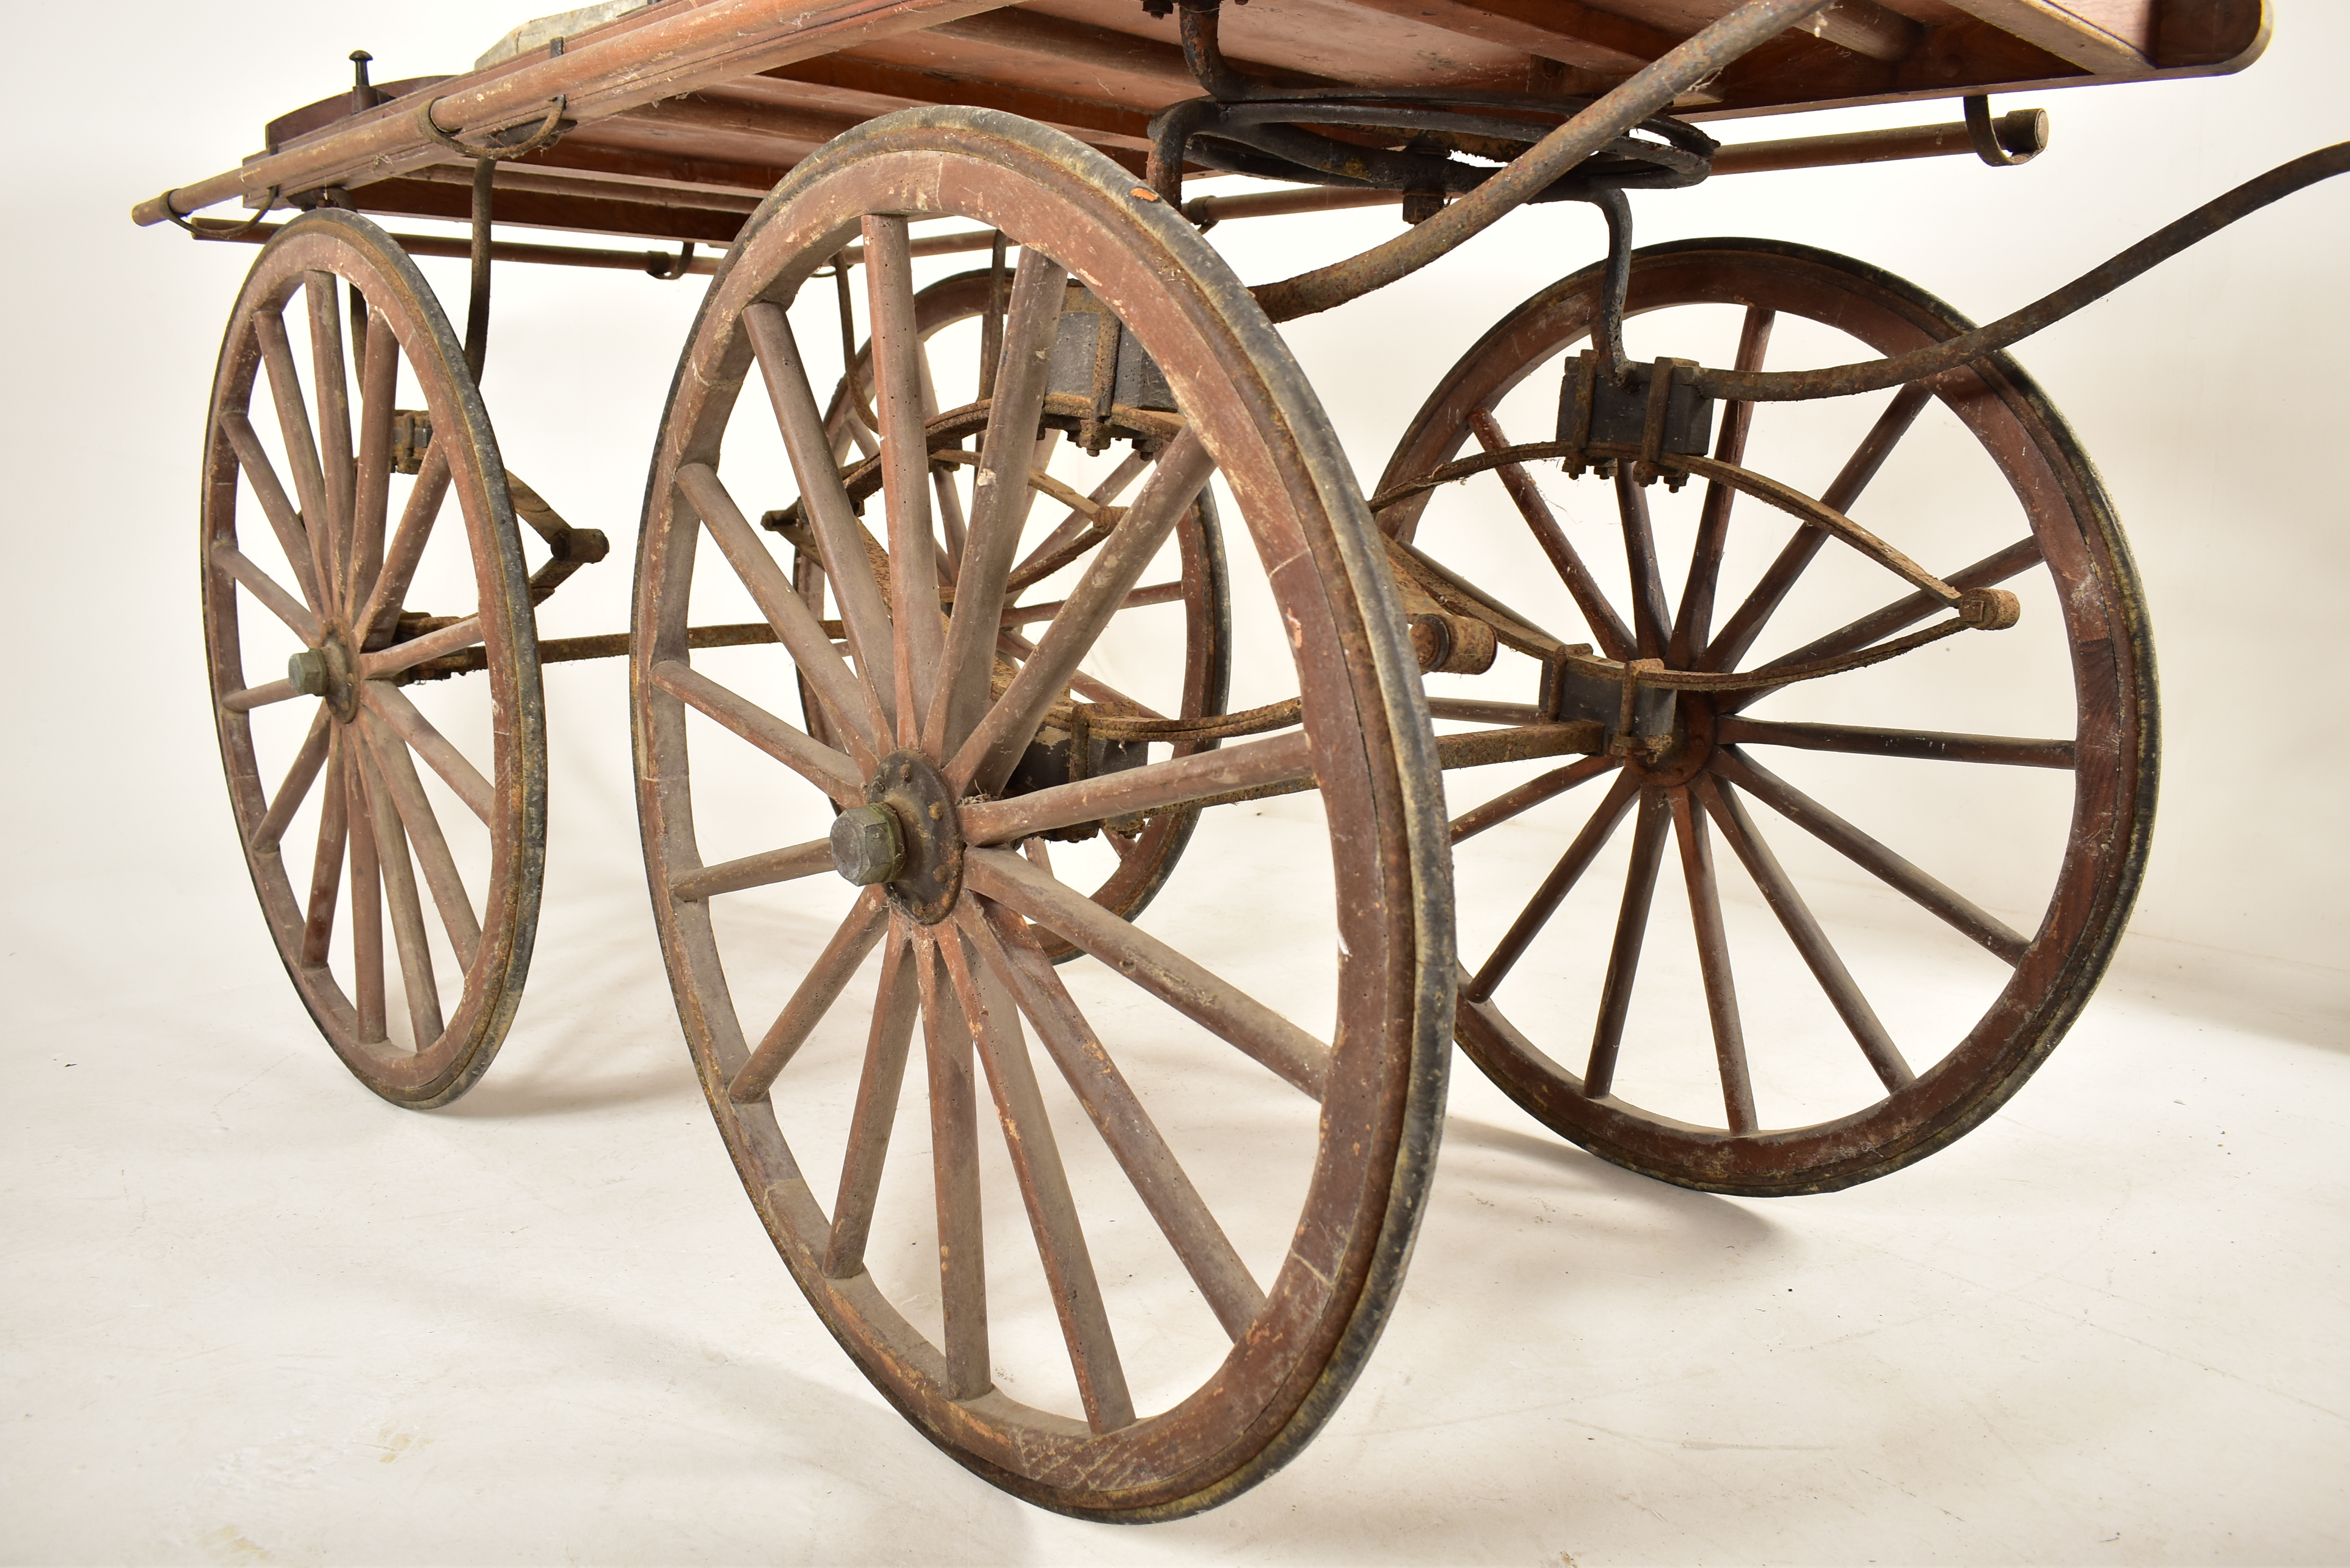 LATE 19TH CENTURY MACKNESS OF CHIPPENHAM BIER CARRIAGE - Image 2 of 5